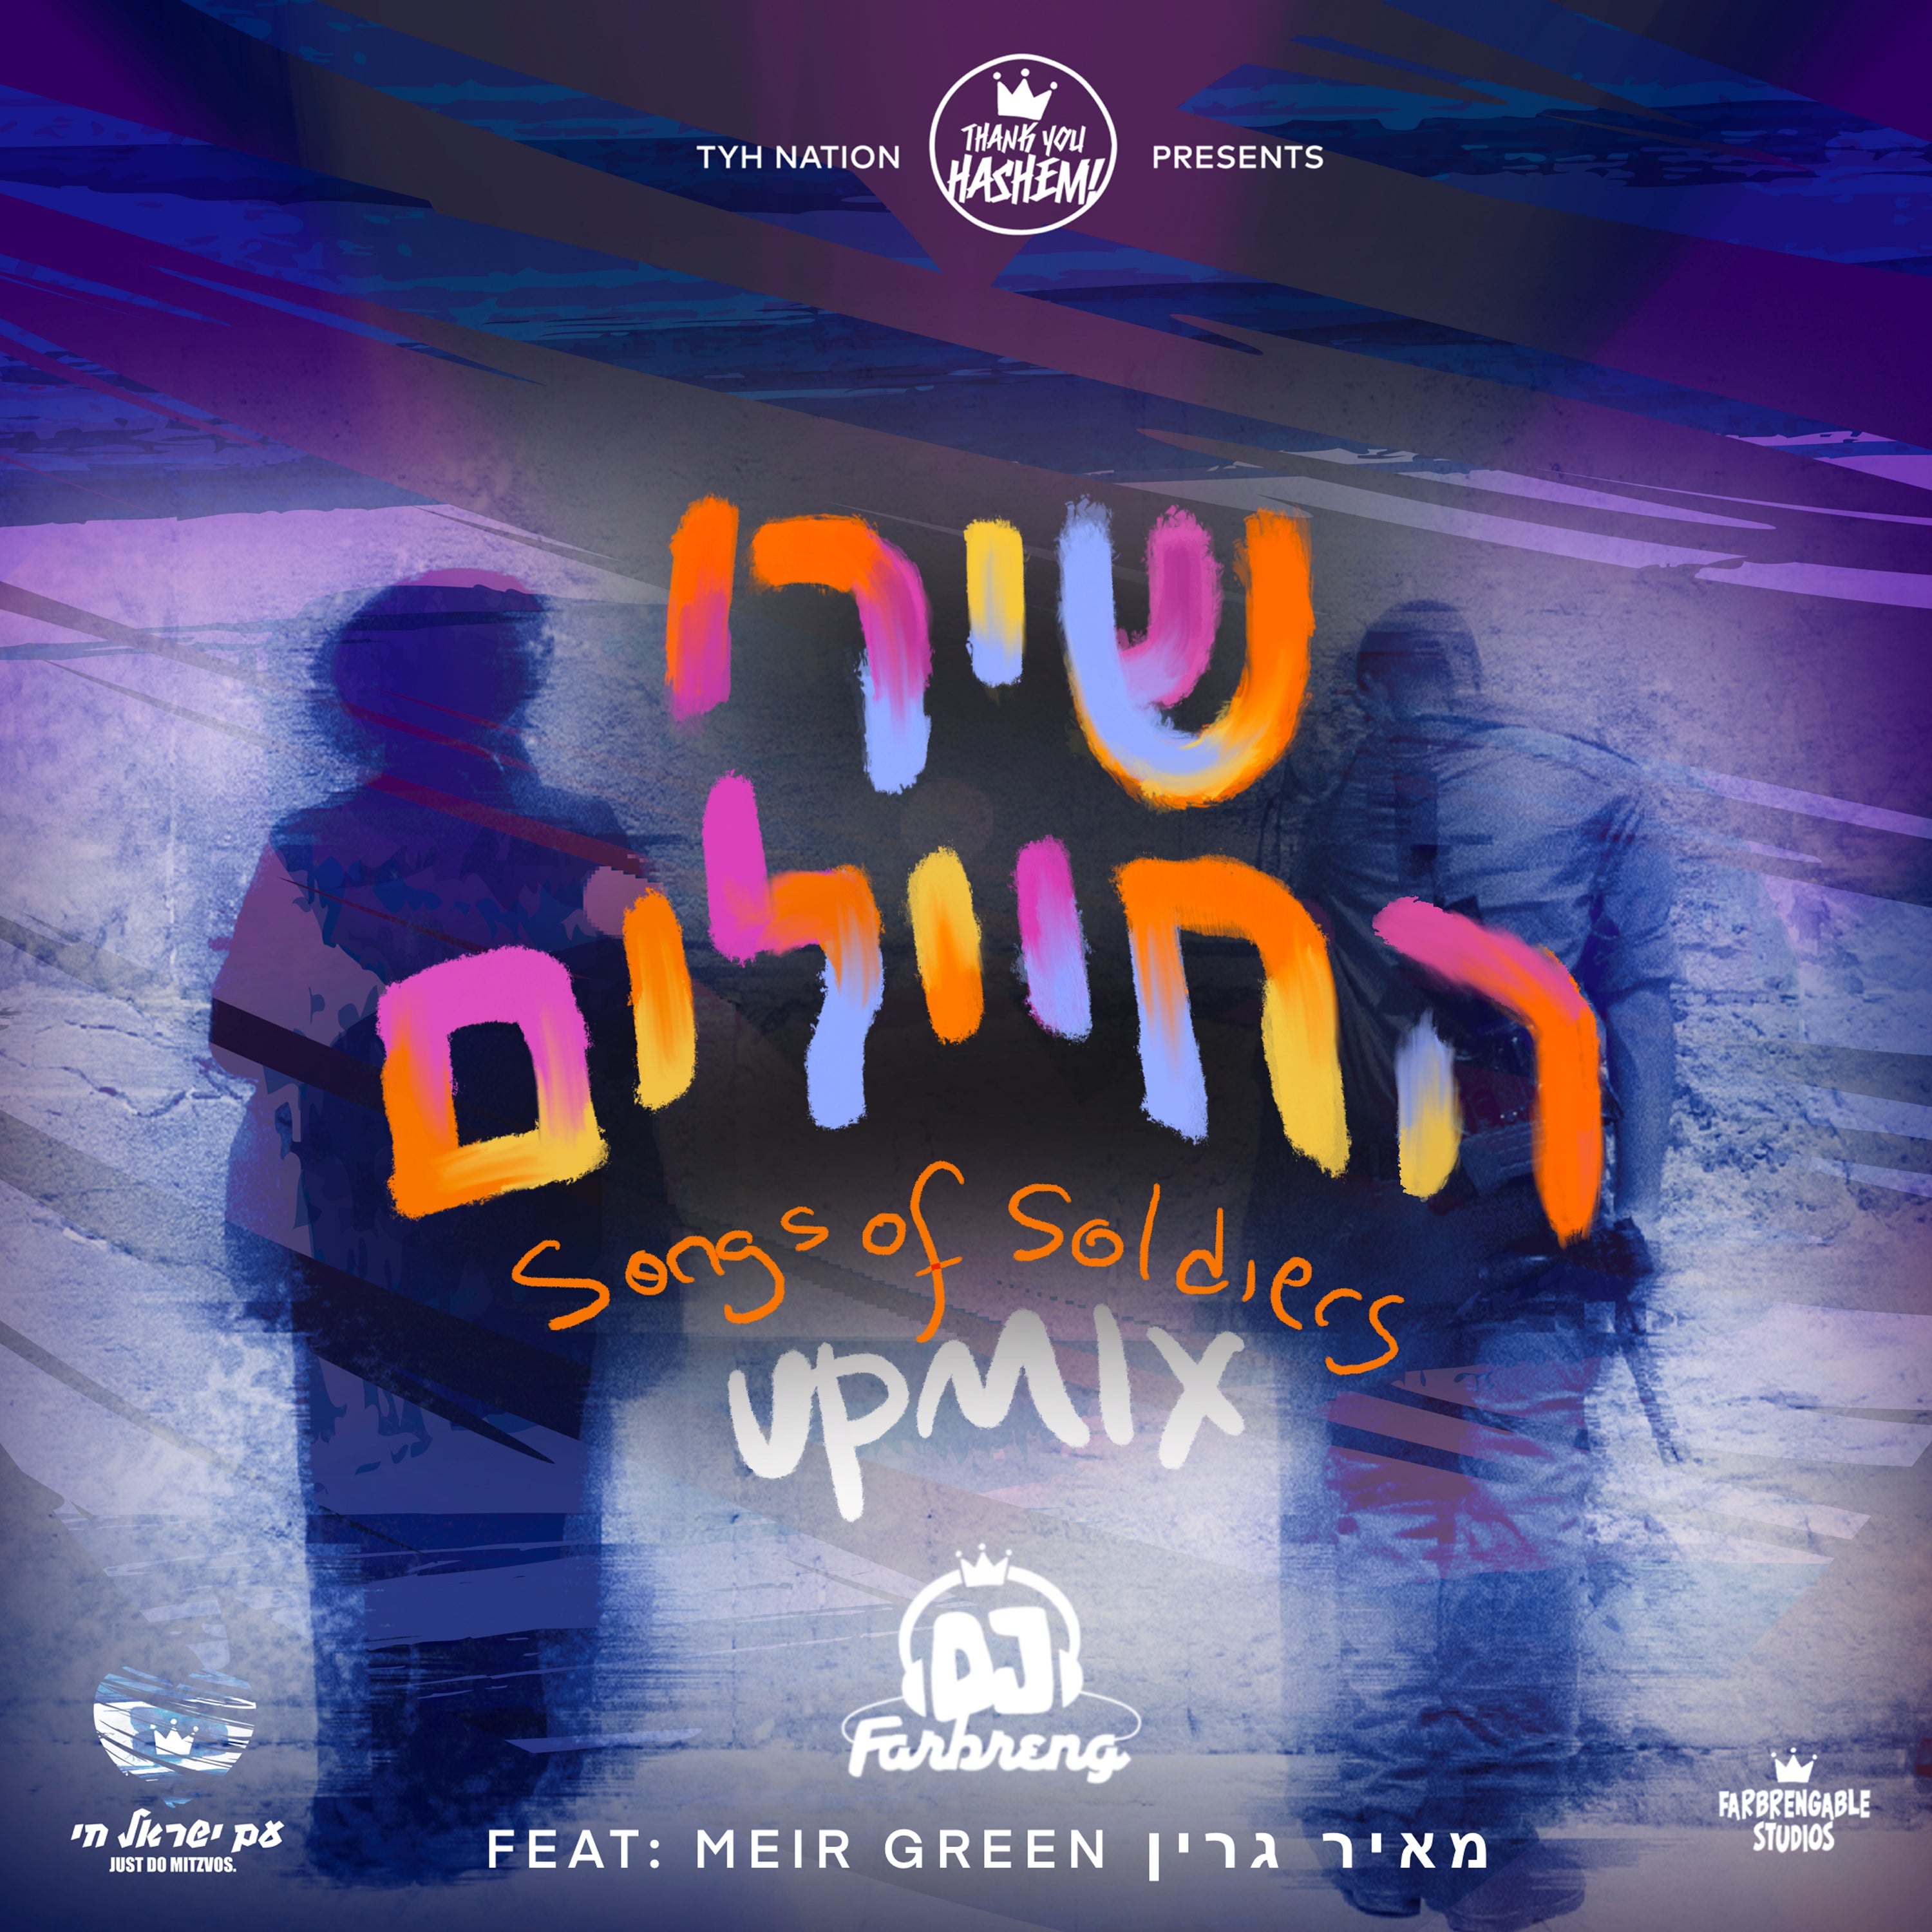 DJ Farbreng Ft. Meir Green - Songs Of Soldiers [Upmix] (Single)